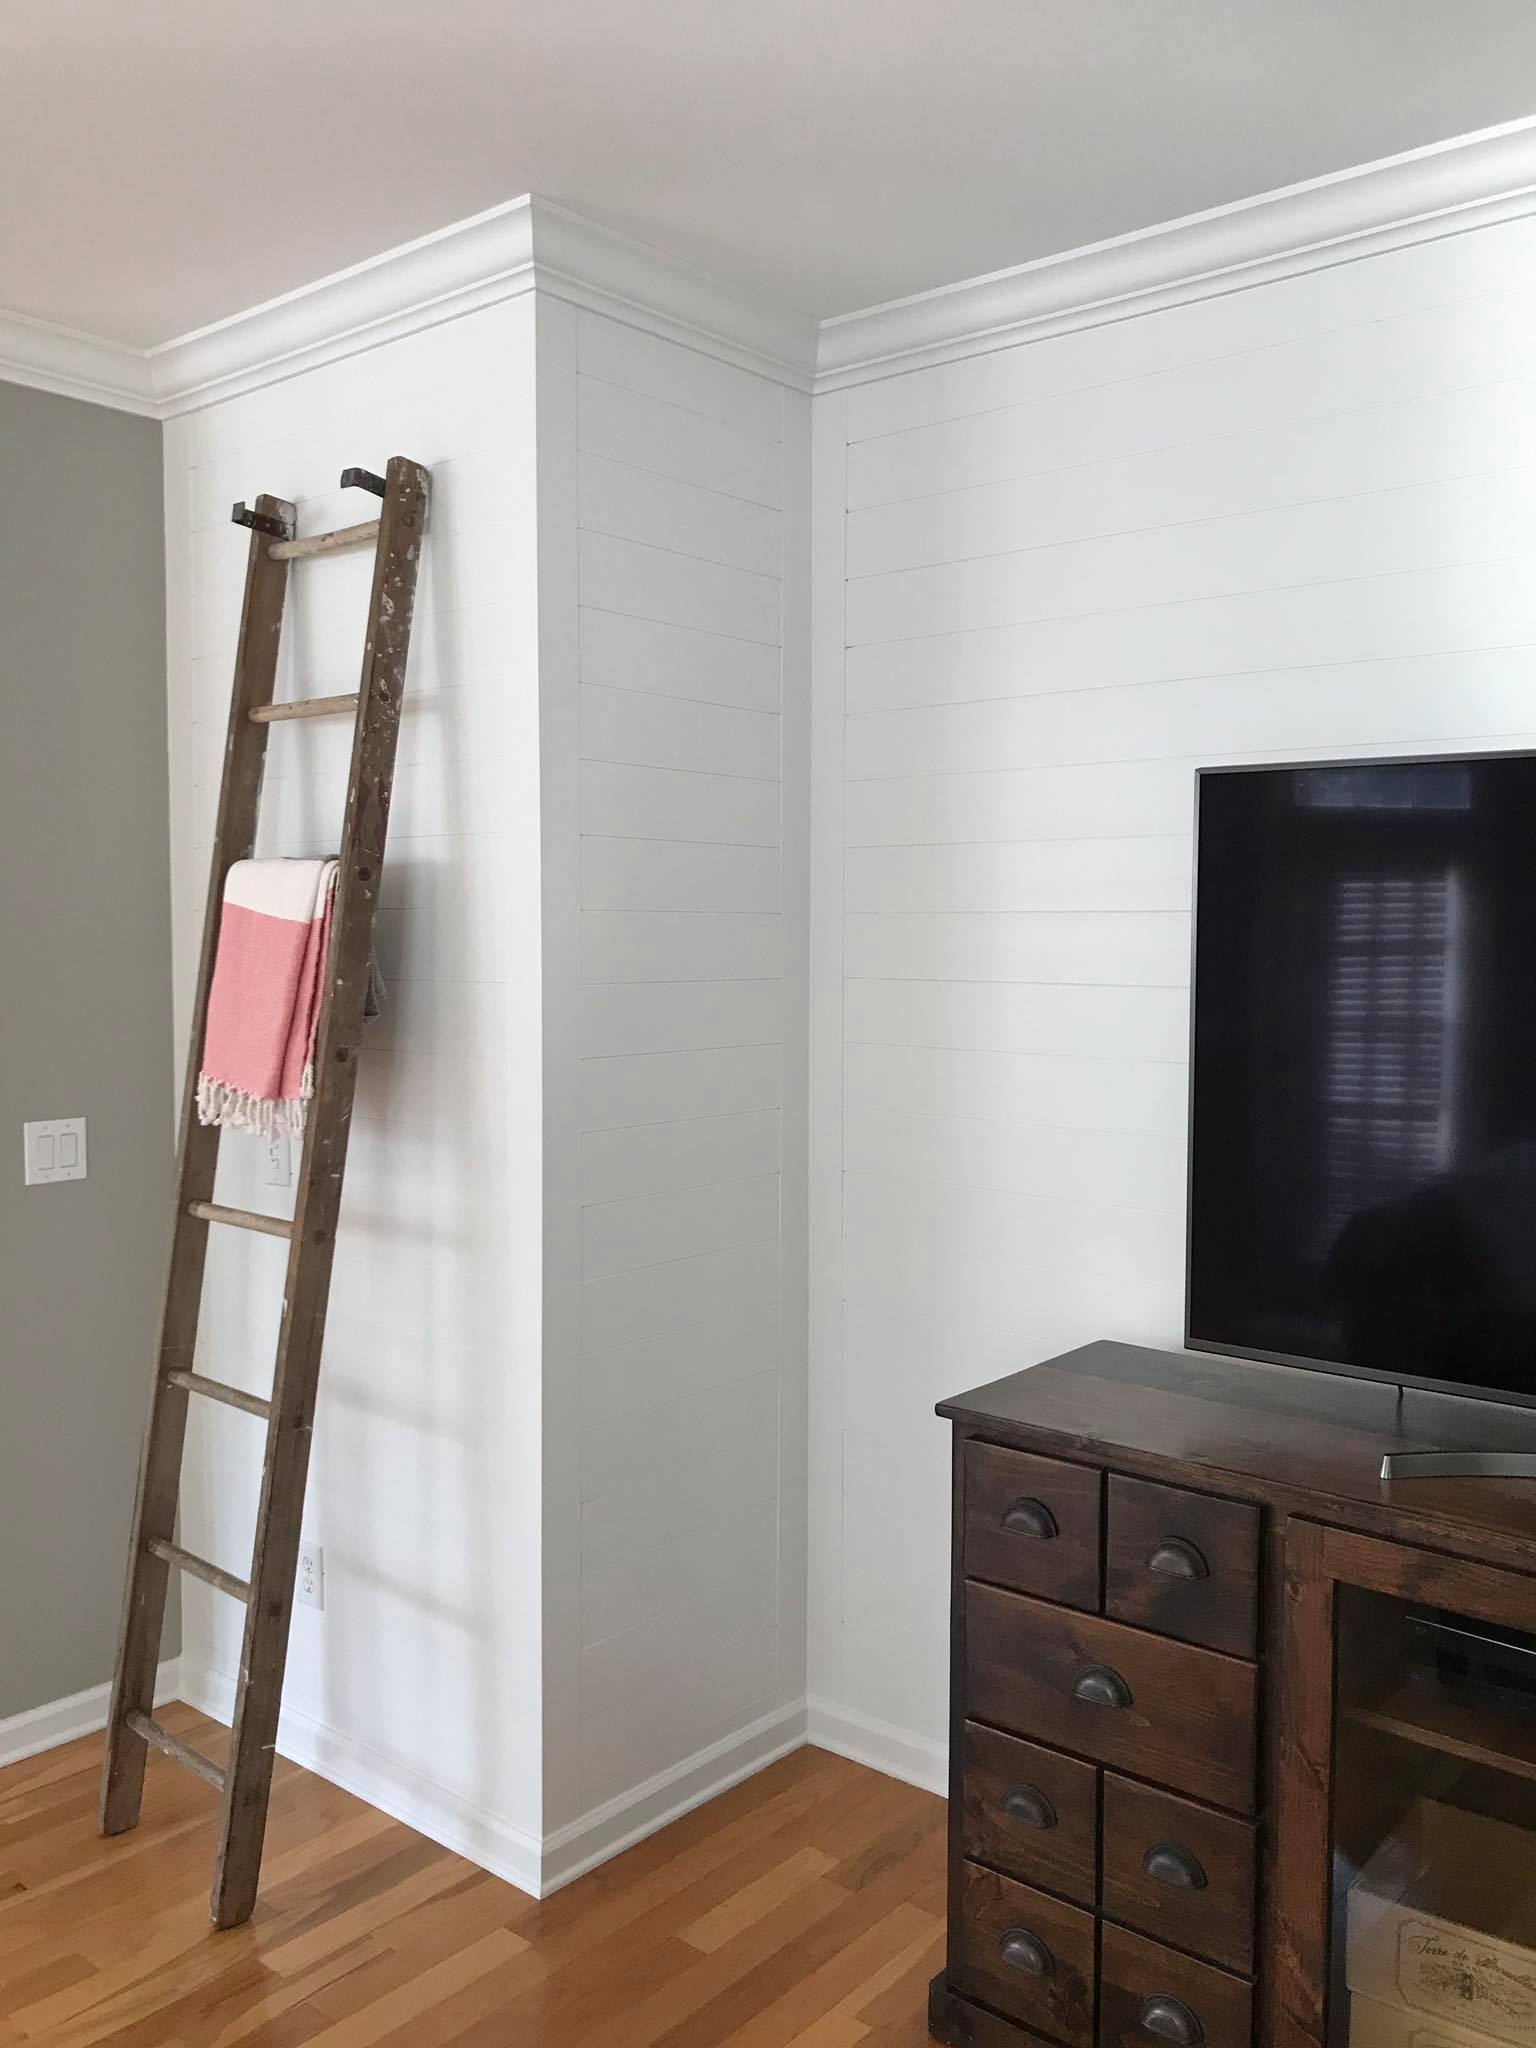 Crown Molding Panels and Shiplap on Walls Installed 2